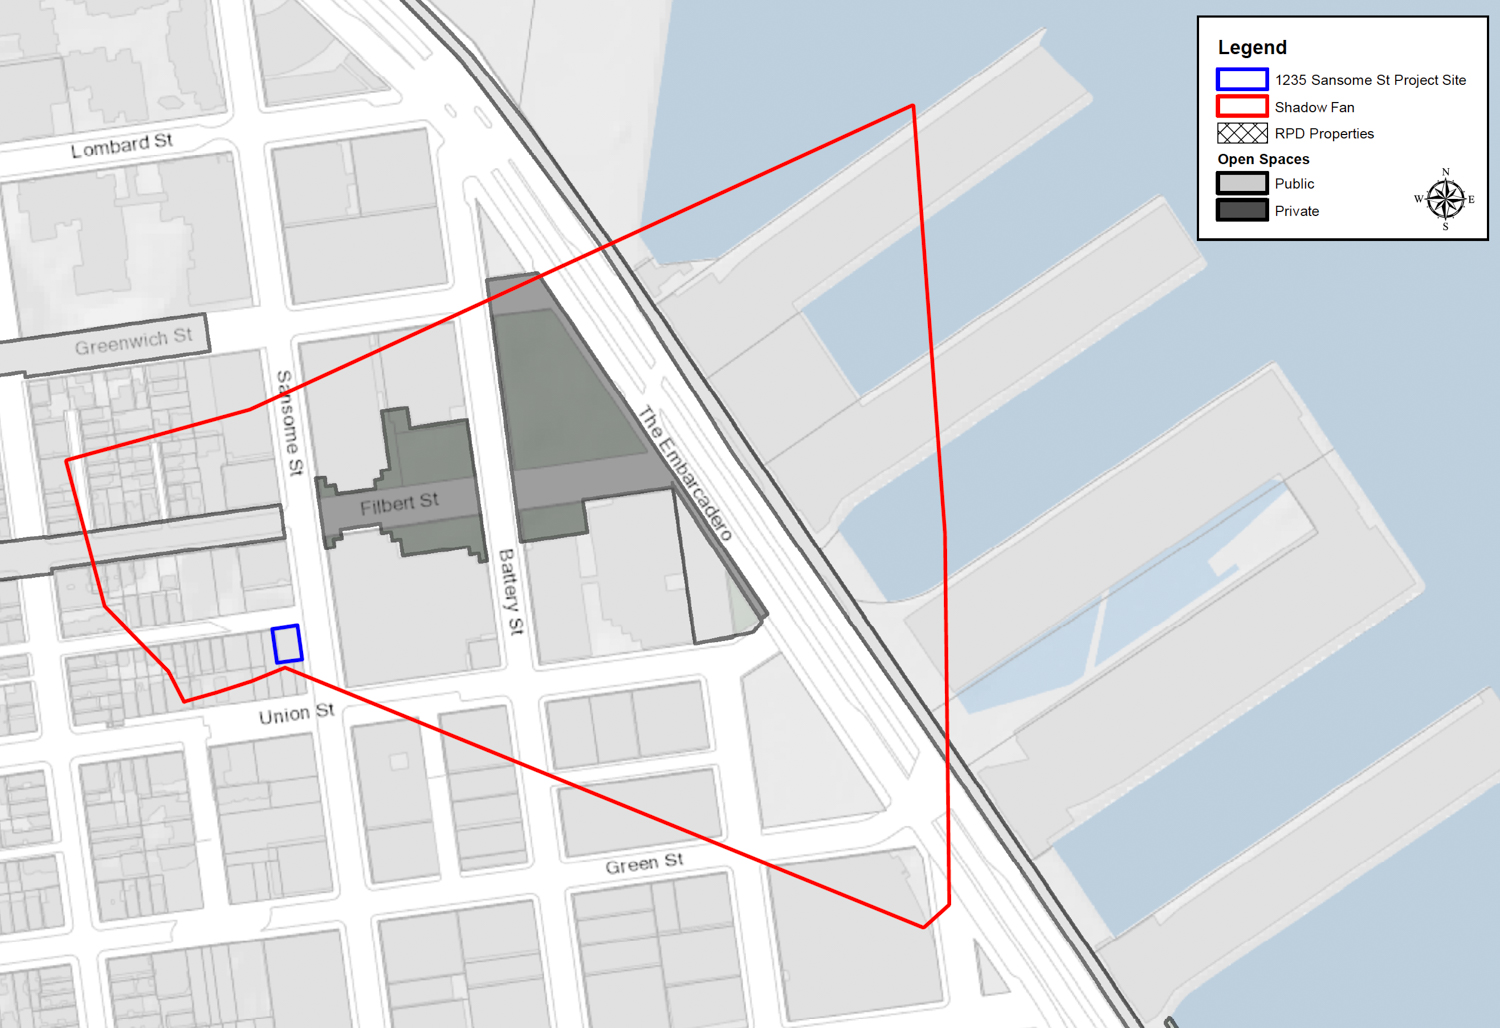 A shadow study for 1235 Sansome Street, courtesy city planning documents